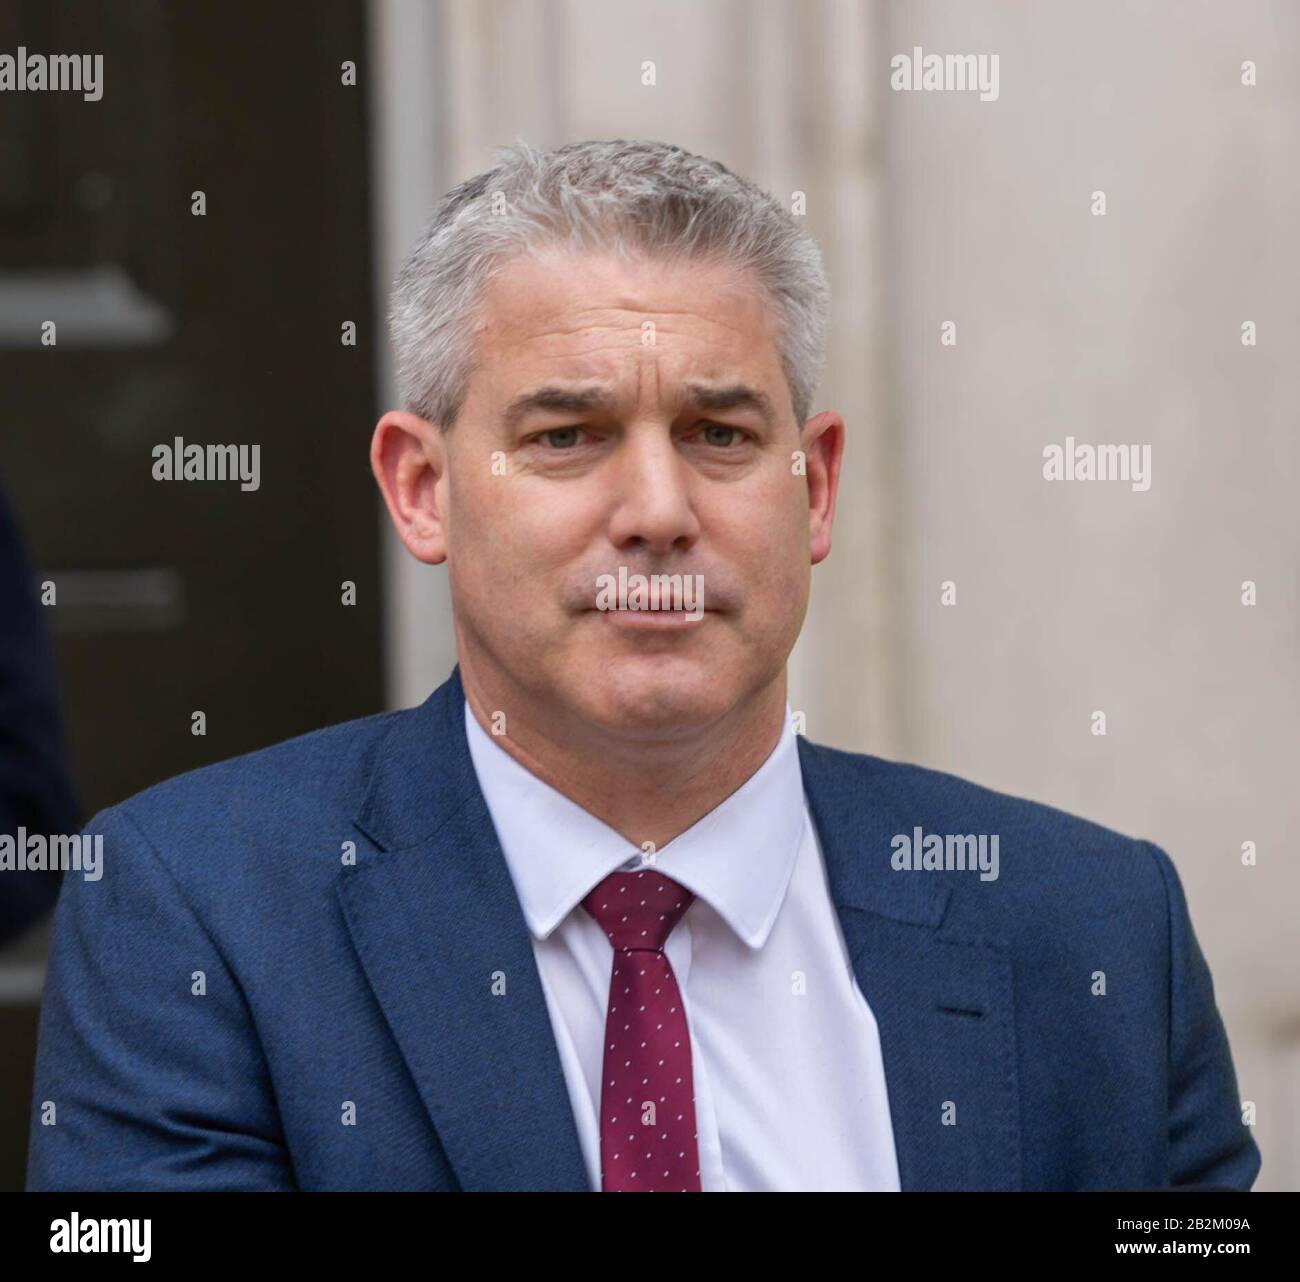 London, UK. 3rd Mar, 2020. Cabinet Ministers leave a meeting at the Cabinet office, Whitehall, London UK Stephen Barclay MP PC Chief Secretary to the Treasury Credit: Ian Davidson/Alamy Live News Stock Photo